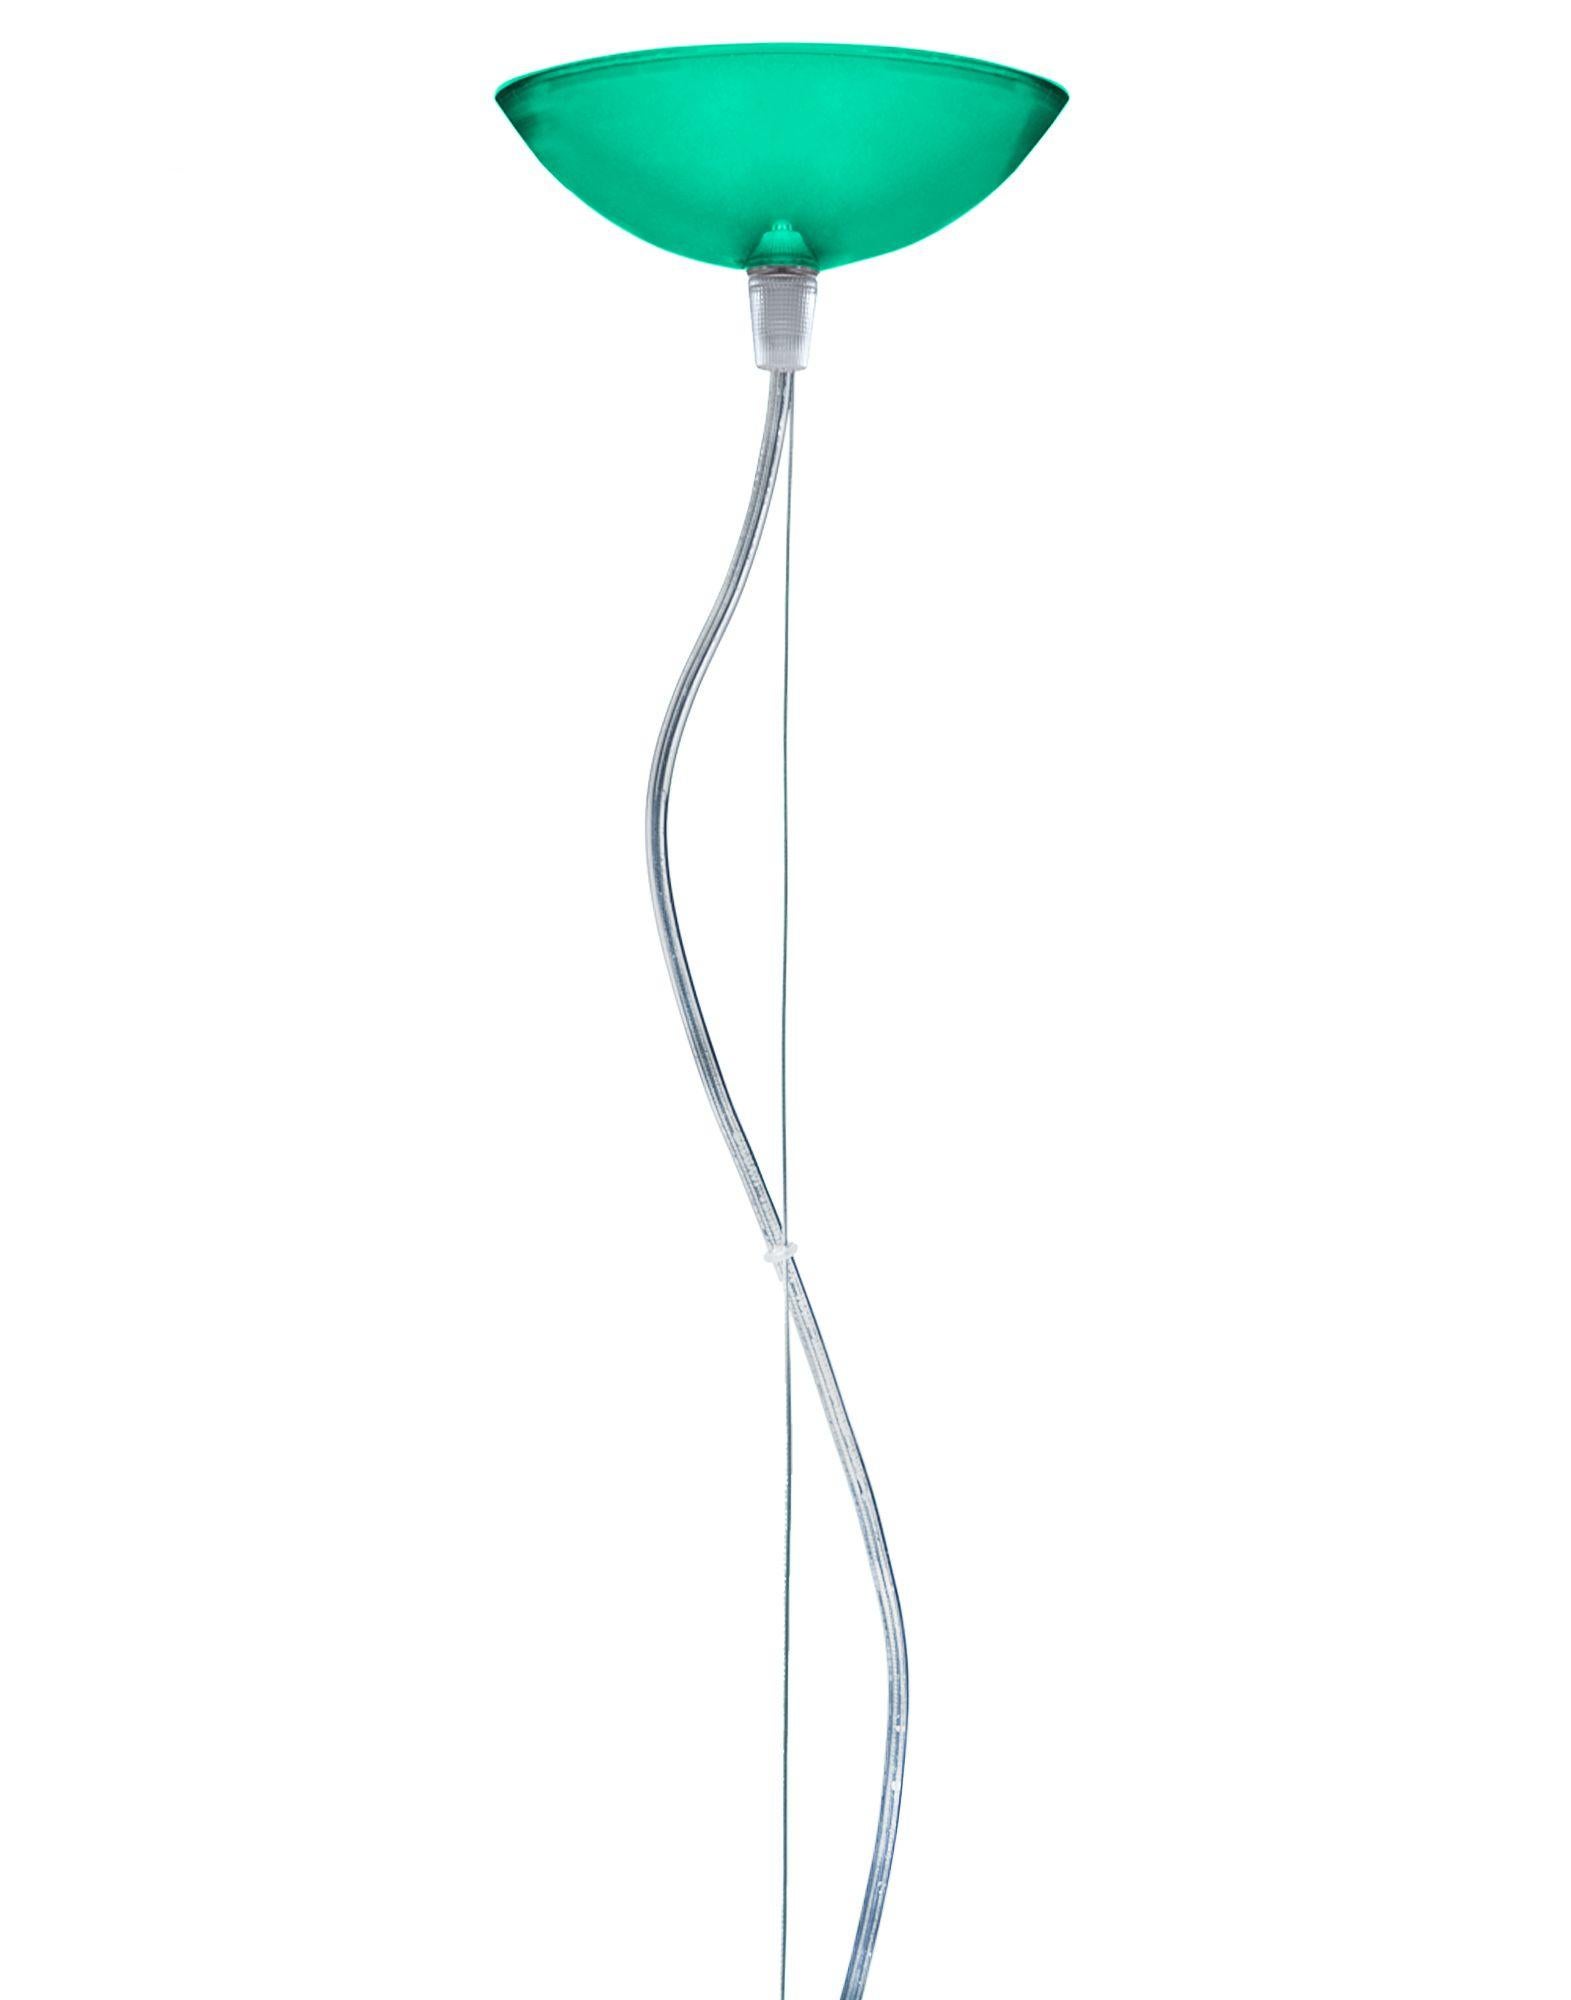 An essential lamp which is characterised by the “subtle interpretations of the theme. Made in transparent methacrylate in emerald green, the cover is not perfectly hemispherical but the cut-off is underneath the height of the diameter to collect the